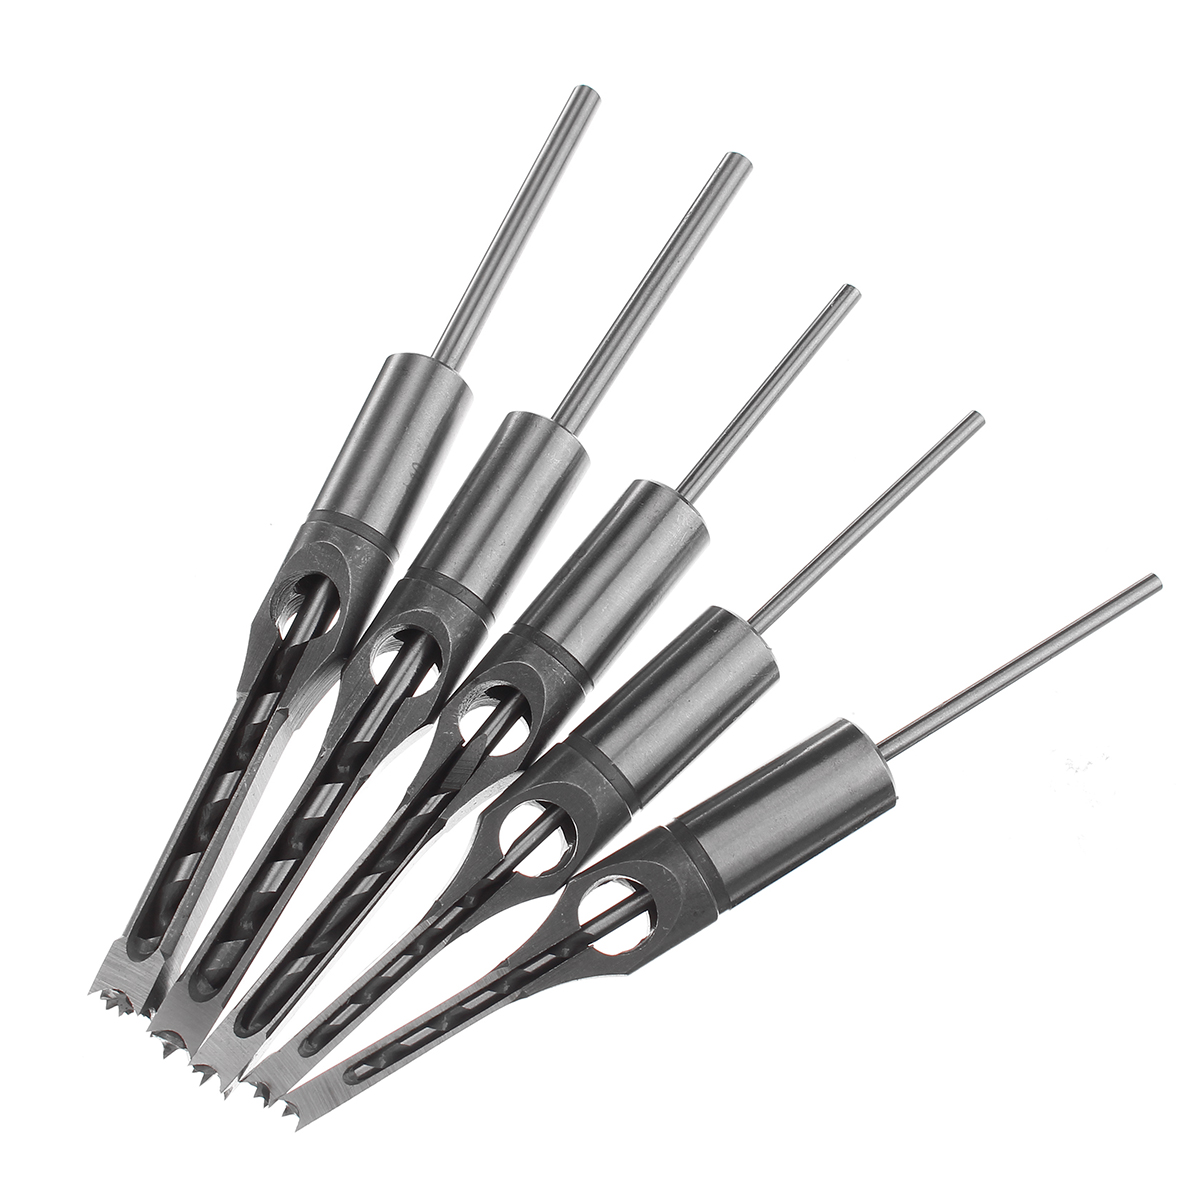 6-19mm-Woodworking-Drill-Bit-Square-Hole-Chisel-Mortising-Kit-Tenon-Wood-Tool-1615910-5